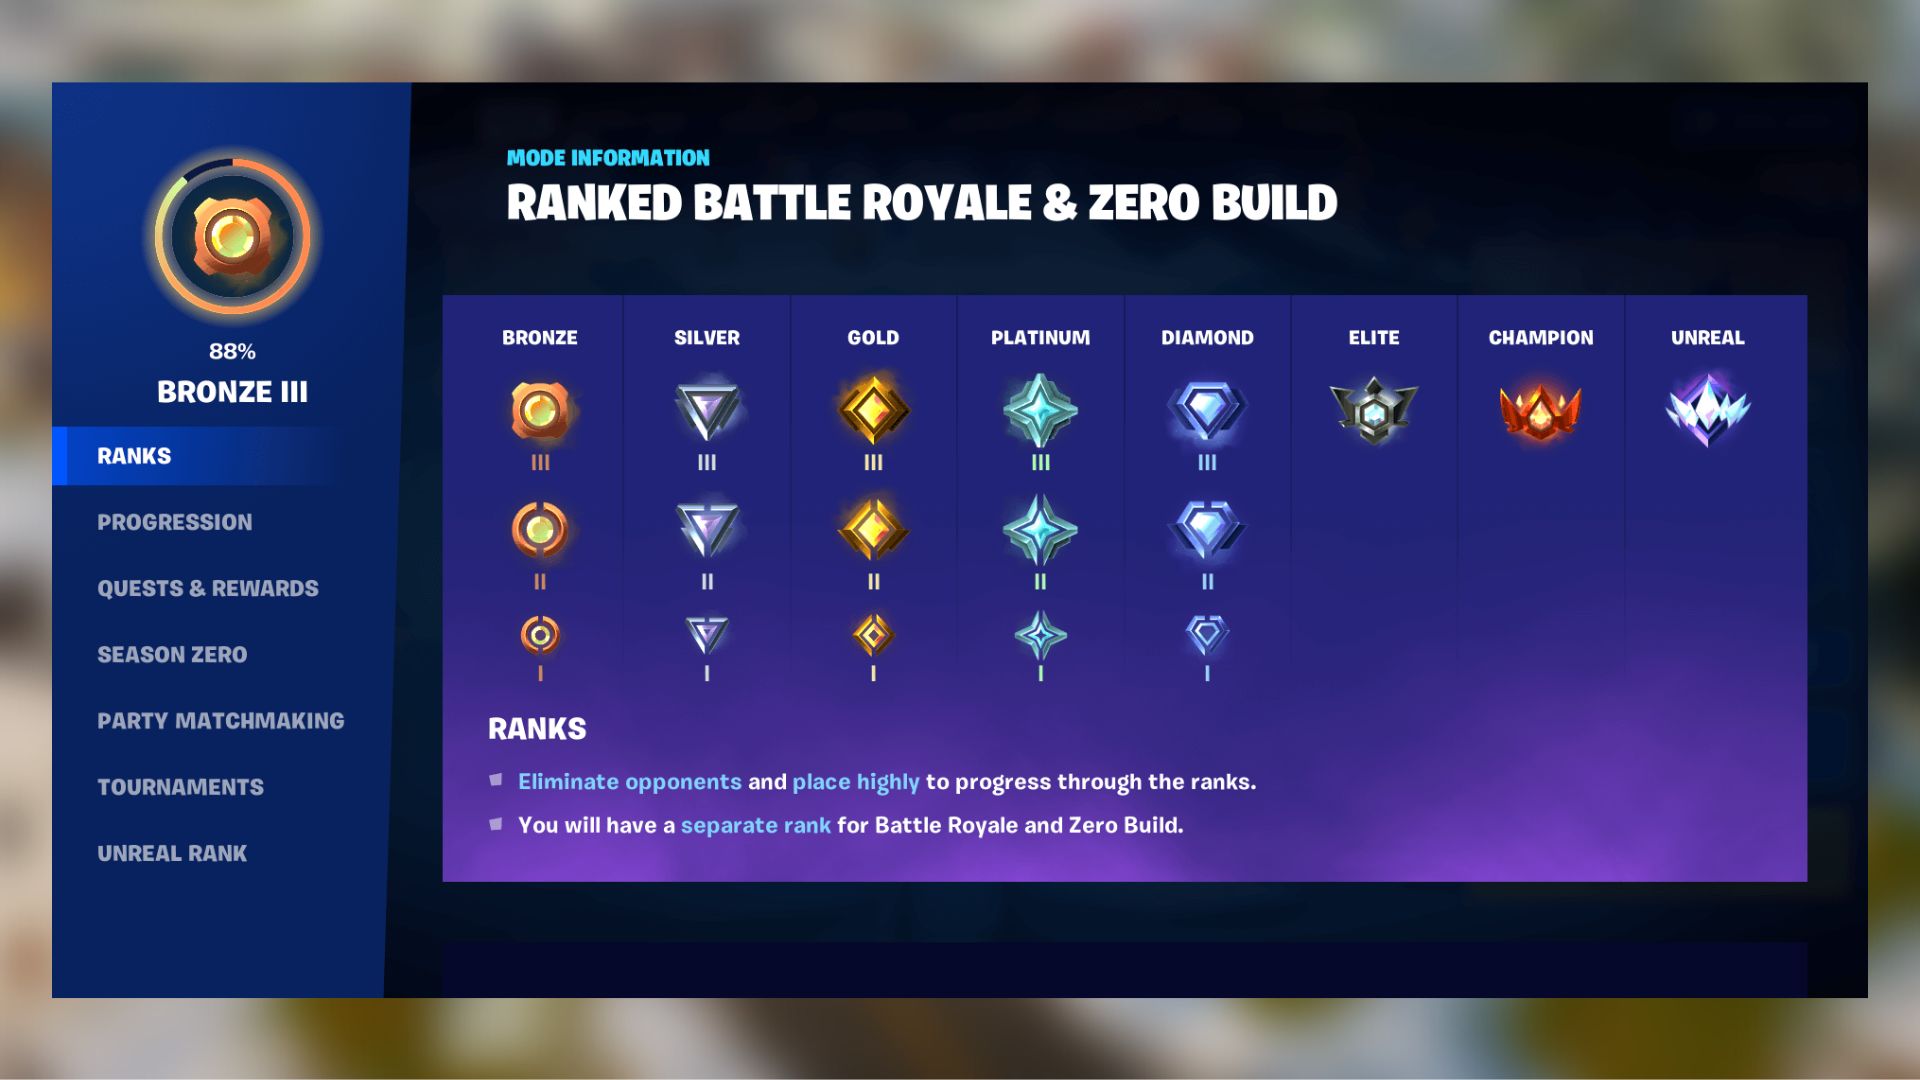 Does Fortnite need a ranked system? - Fortnite INTEL